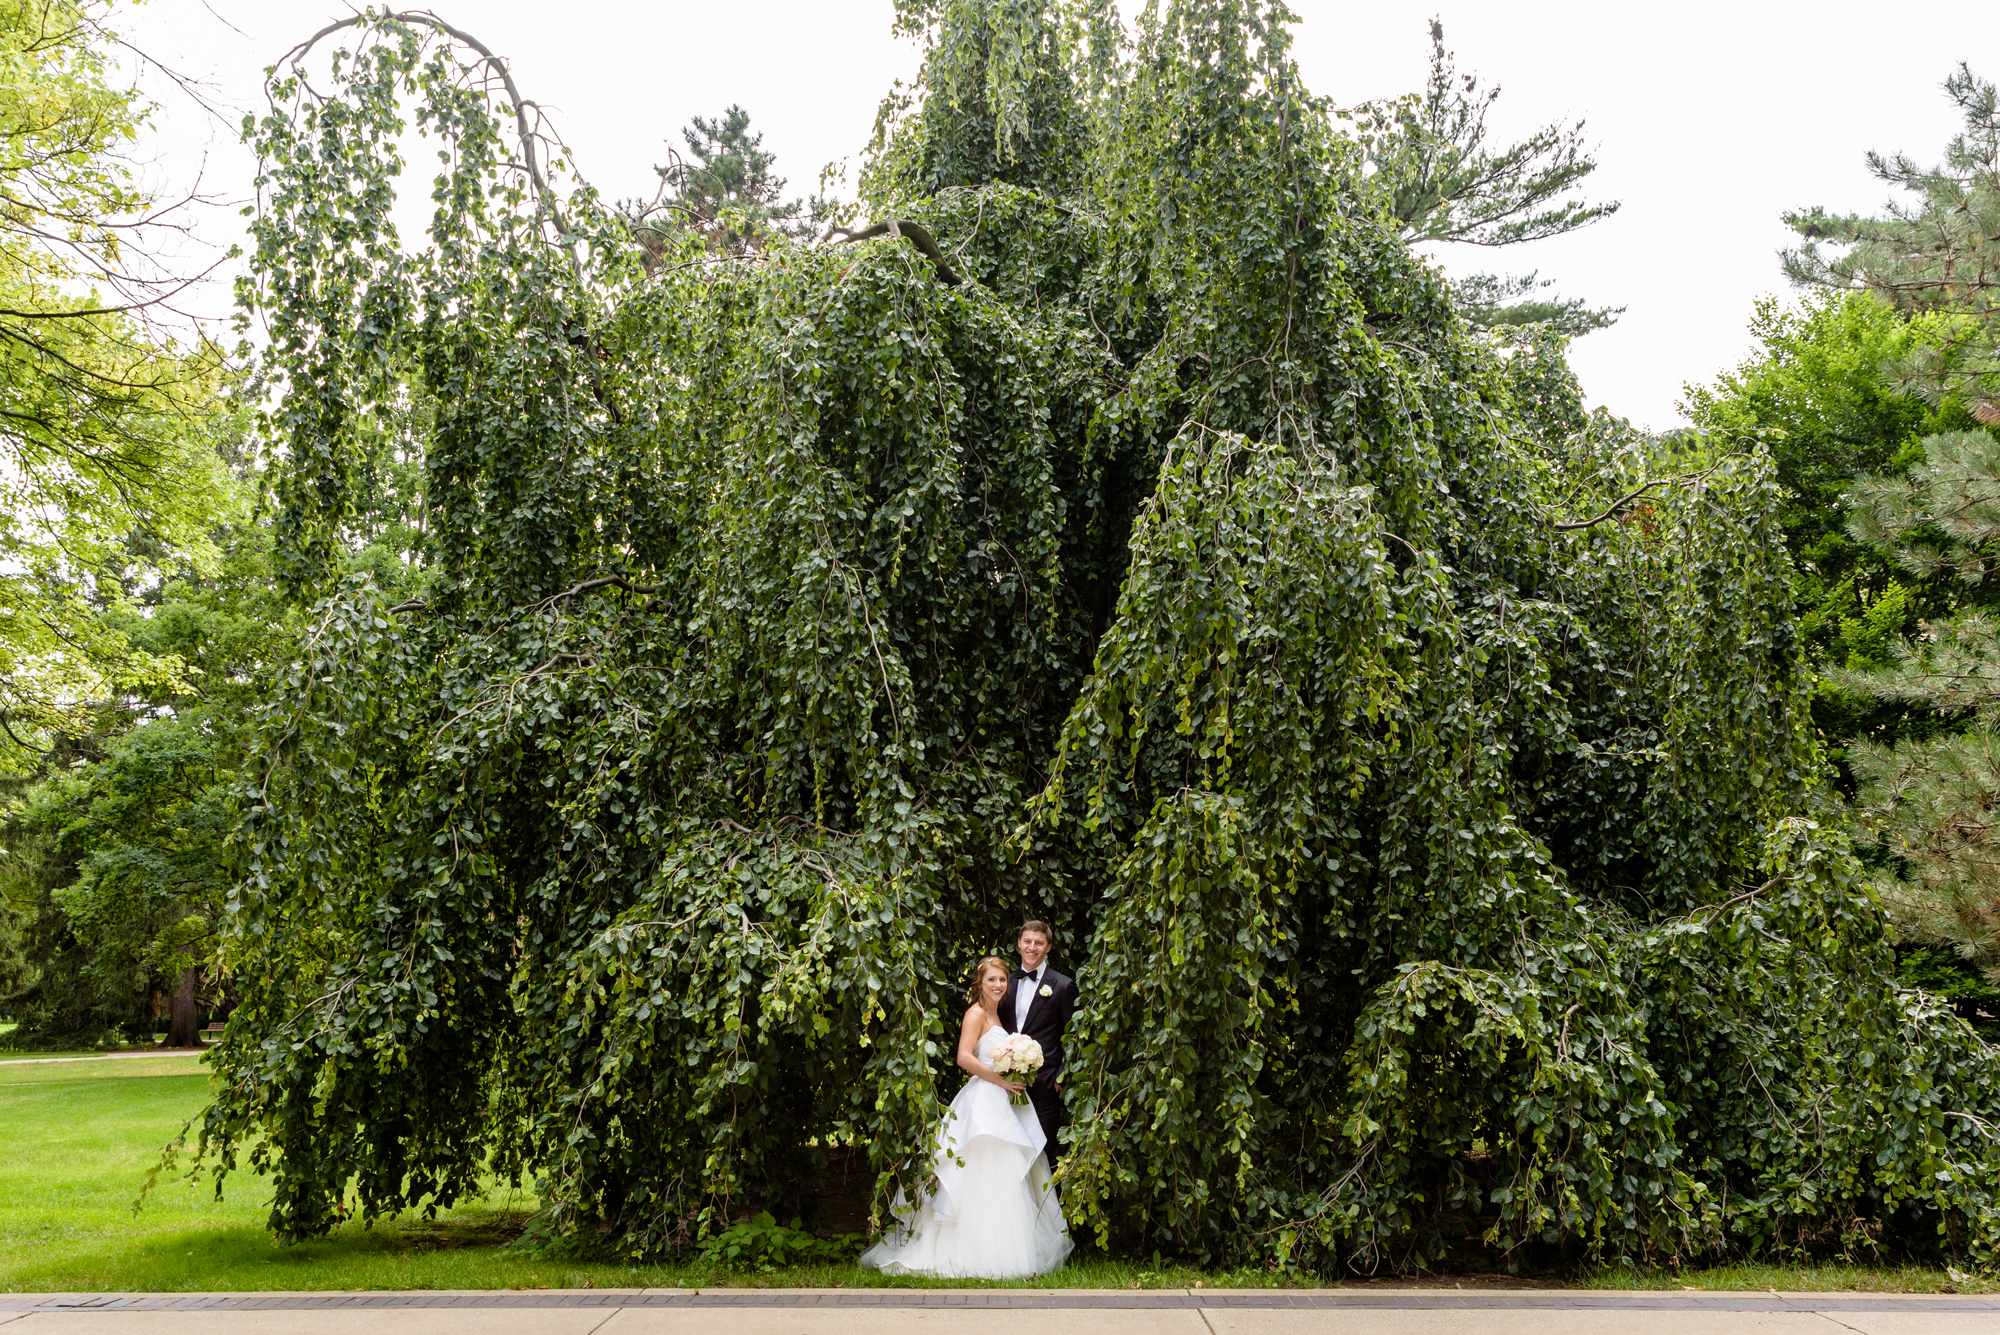 Bride & Groom in front of an exotic California inspired tree after their wedding ceremony at the Basilica of the Sacred Heart on the campus of the University of Notre Dame